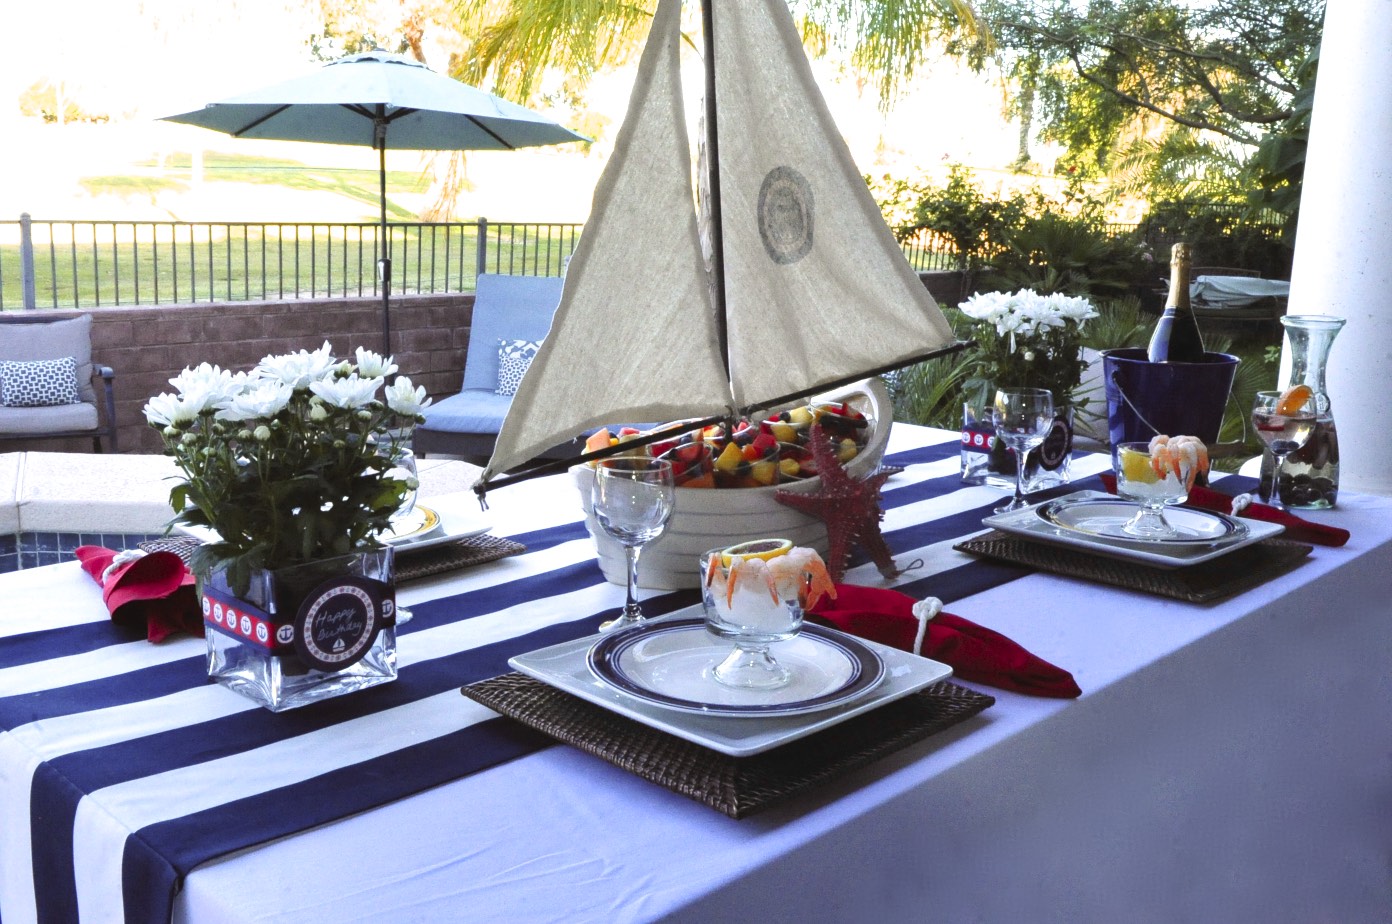 Nautical Birthday Party table decor - Candles and Favors